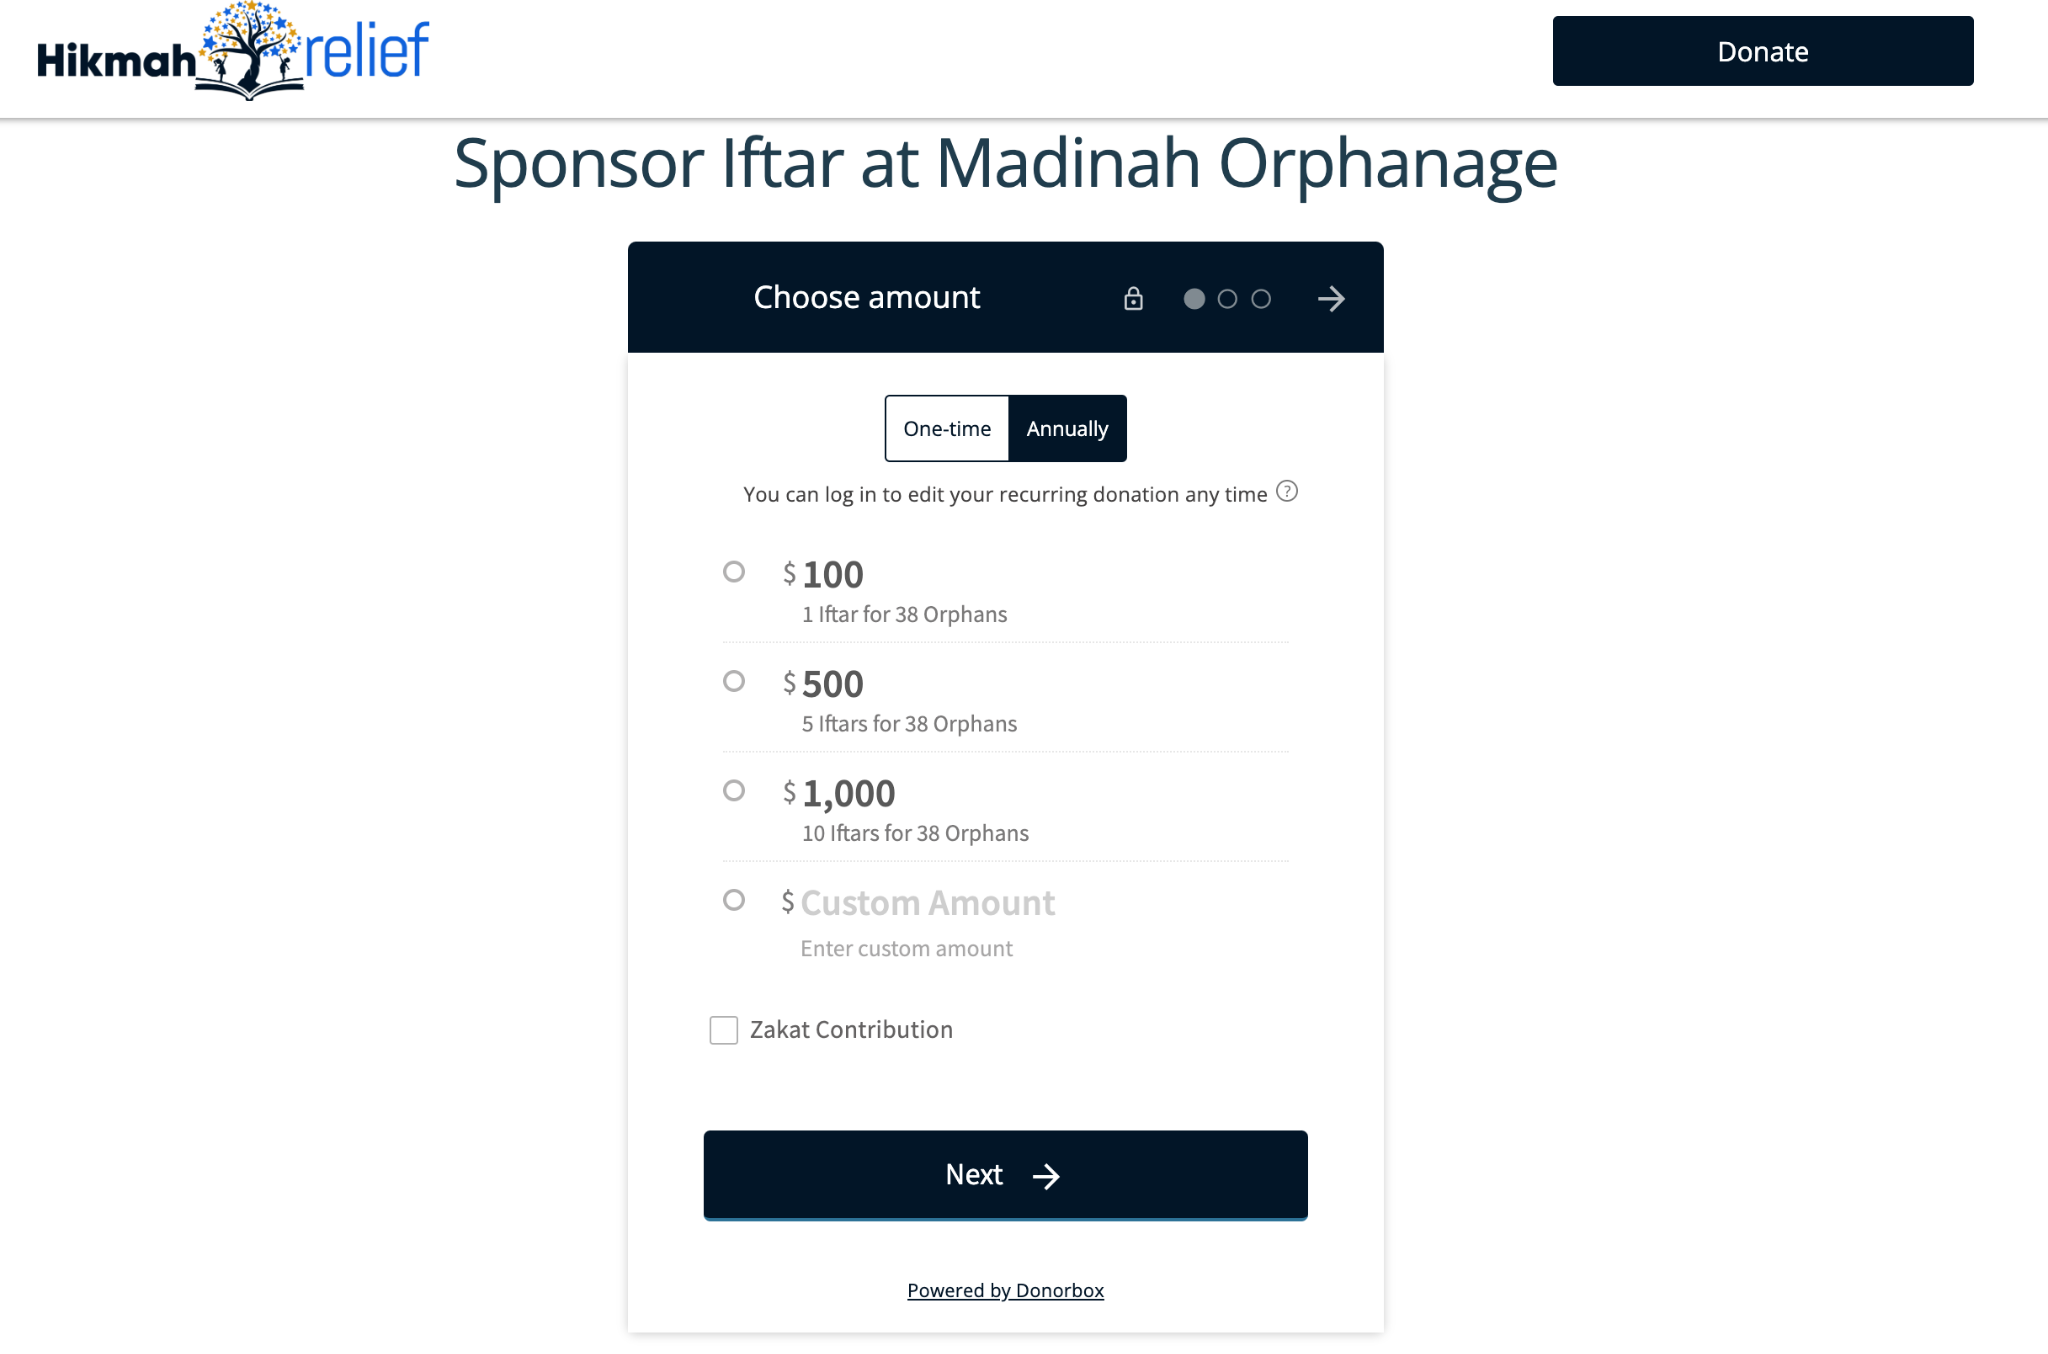 Screenshot of an organization using Donorbox to collect donations to sponsor Iftar at an orphanage. 